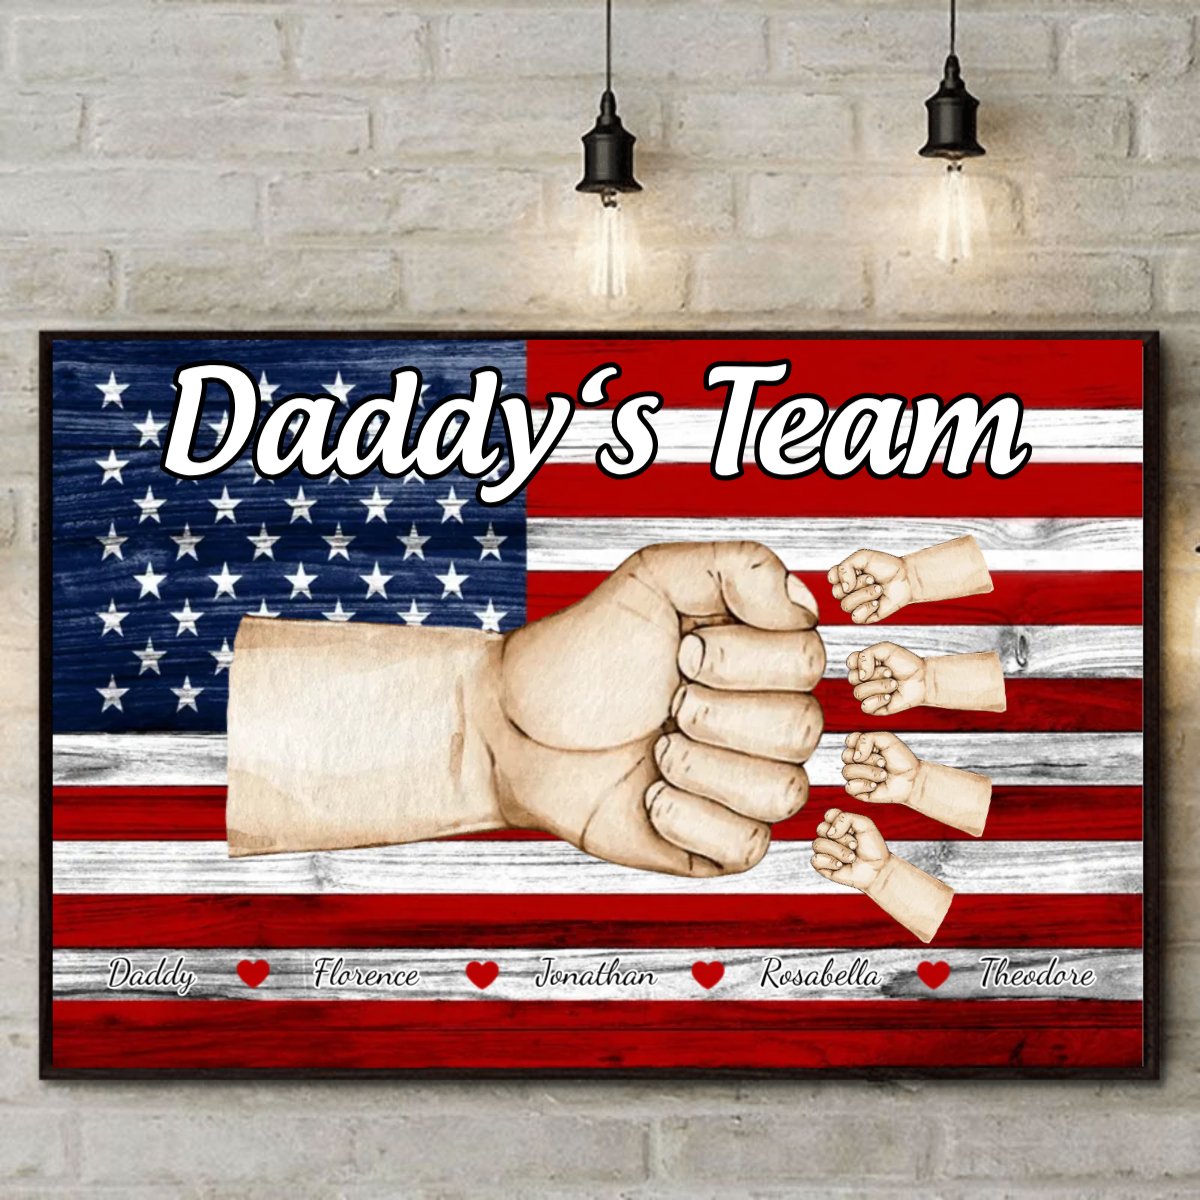 Family - Nation Flag Daddyƒ??s Team Fist Bump - Personalized Poster - The Next Custom Gift